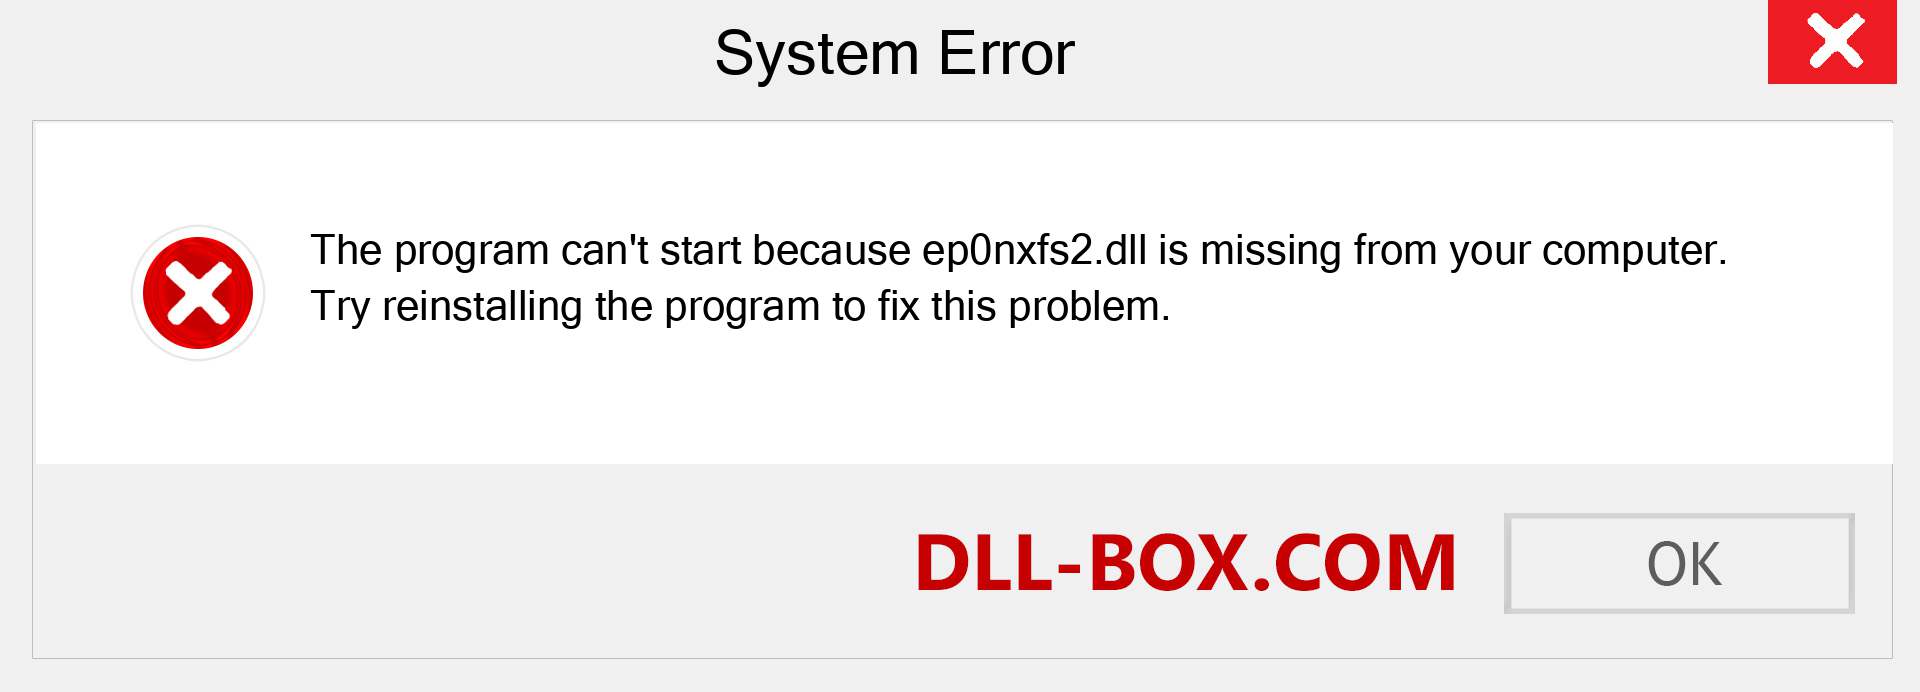  ep0nxfs2.dll file is missing?. Download for Windows 7, 8, 10 - Fix  ep0nxfs2 dll Missing Error on Windows, photos, images